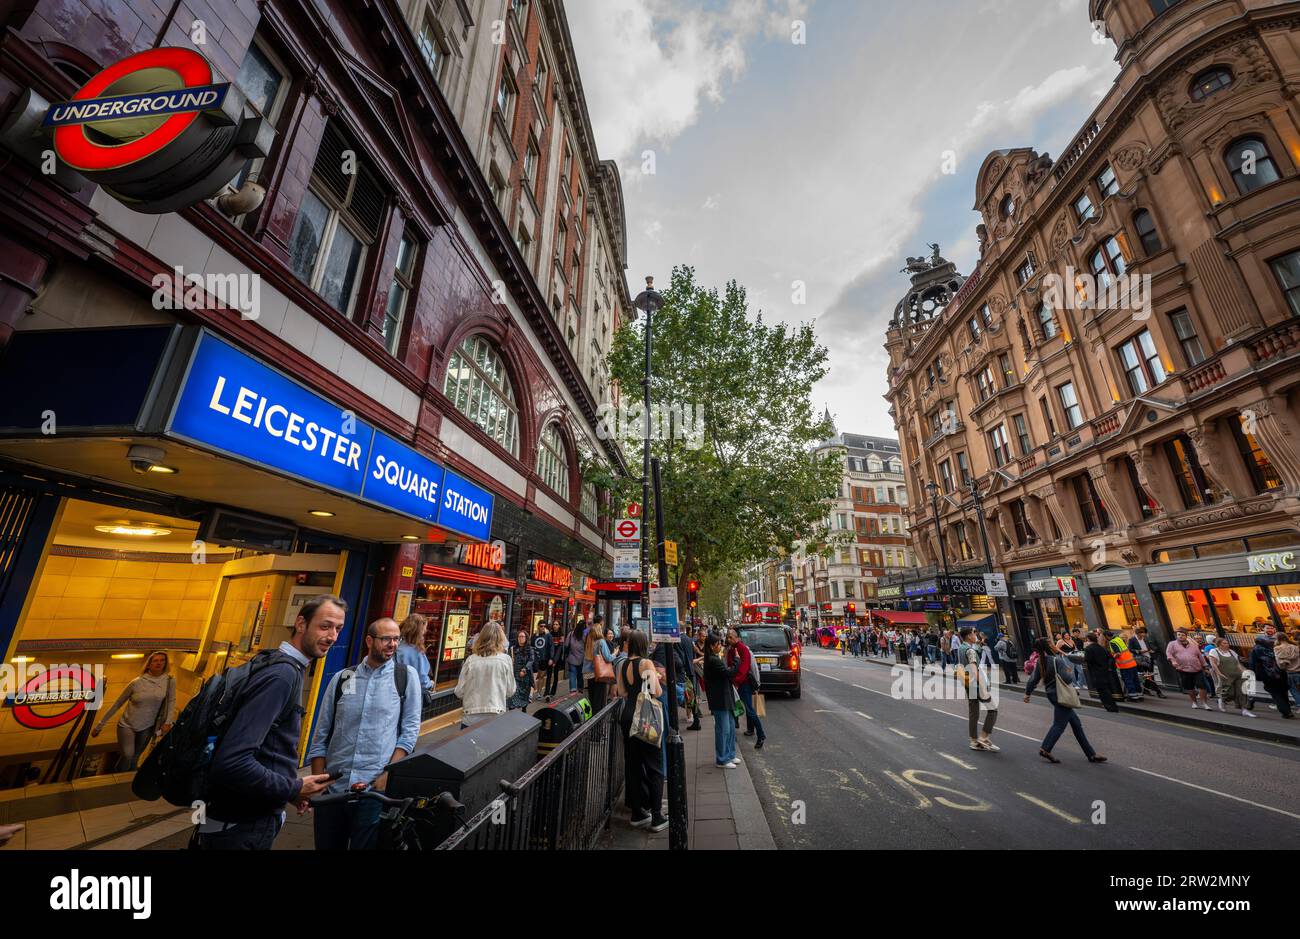 London, UK: Leicester Square underground station on Charing Cross Road located in London's West End. Stock Photo